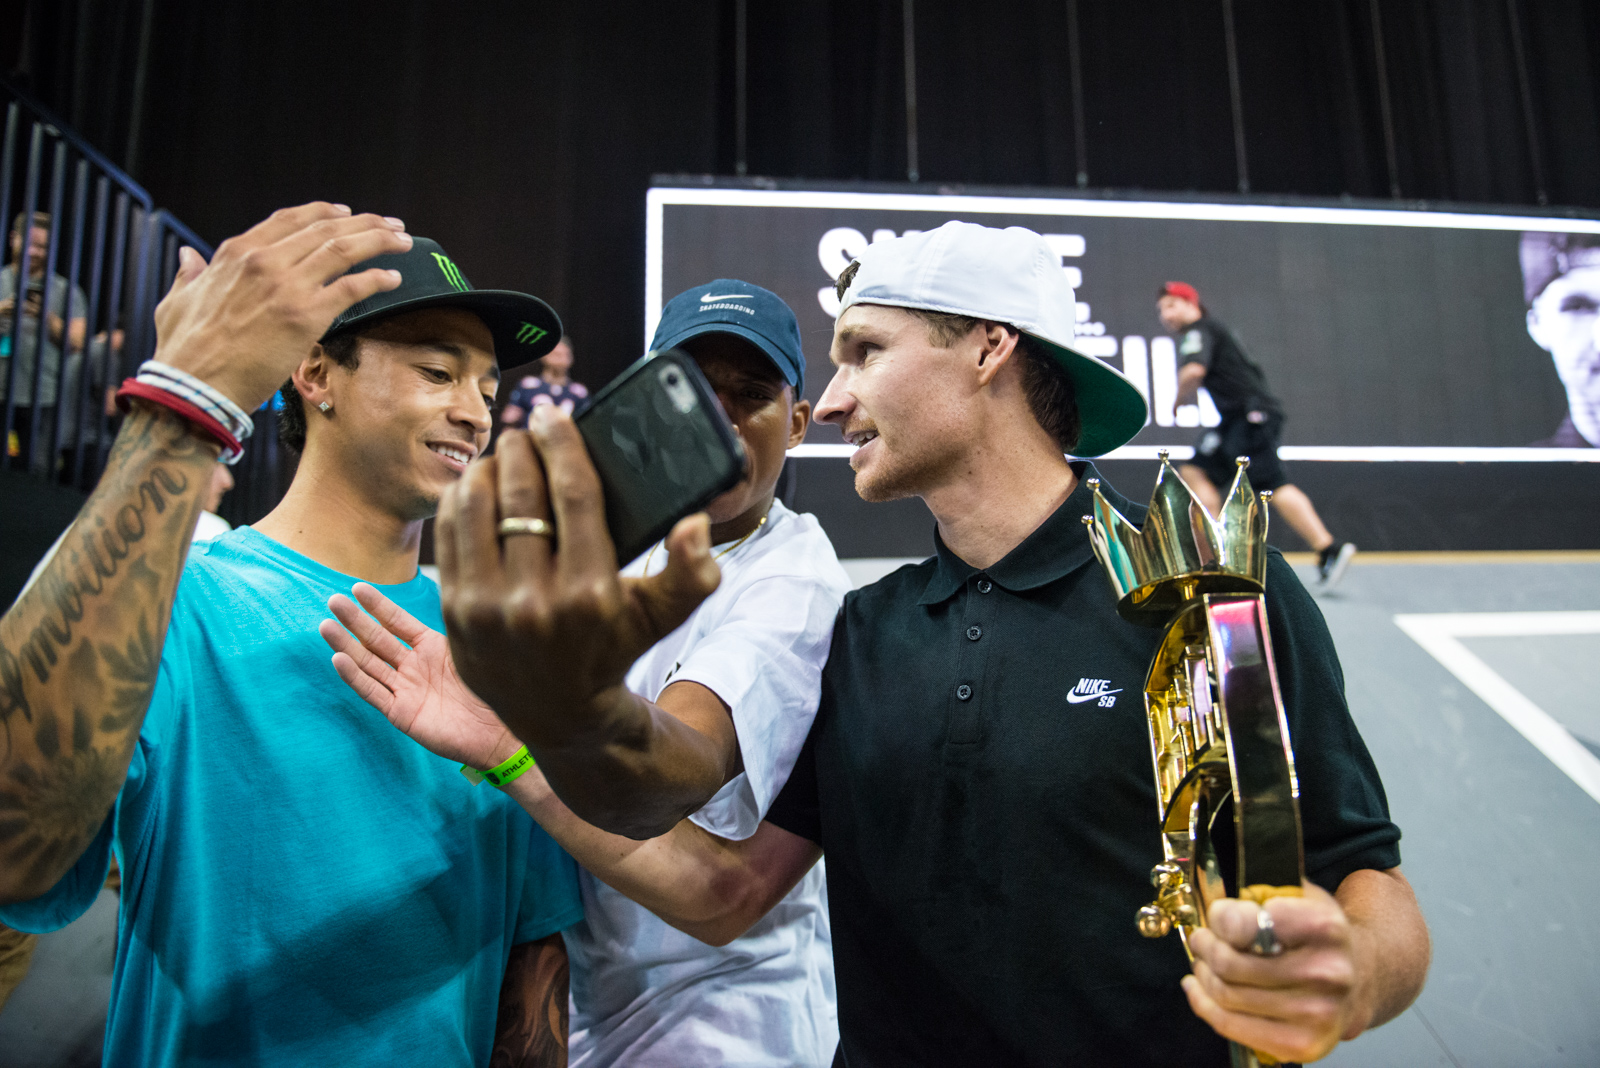 Monster Energy's Nyjah Huston Takes 2nd Place and Shane O'Neill Takes 1st Place at the SLS Nike SB Super Crown World Championship in Los Angeles